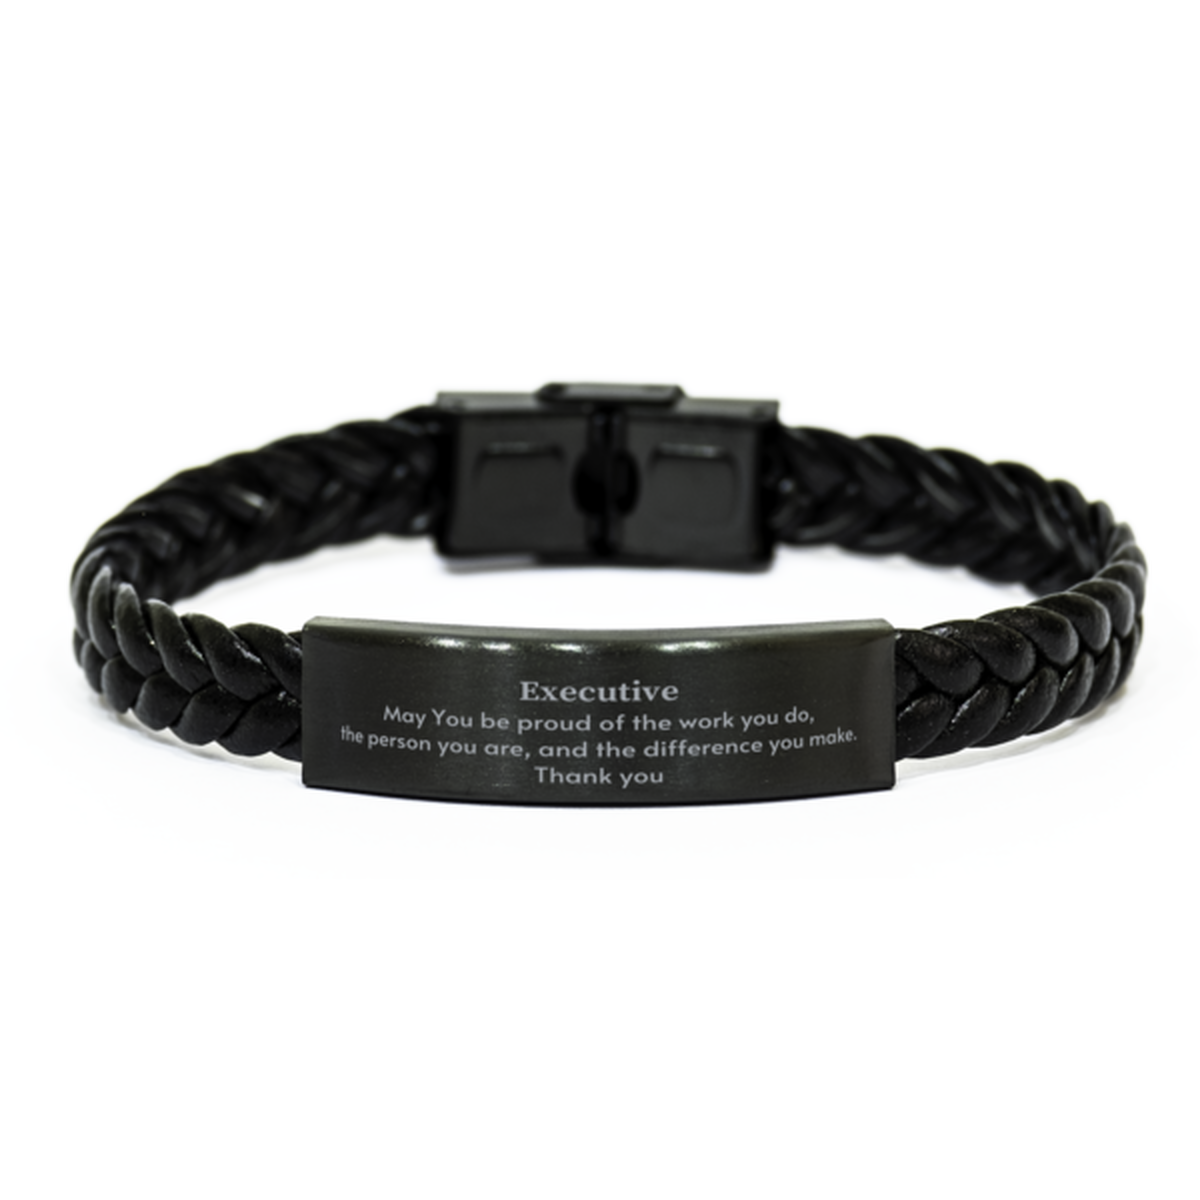 Heartwarming Braided Leather Bracelet Retirement Coworkers Gifts for Executive, Executive May You be proud of the work you do, the person you are Gifts for Boss Men Women Friends